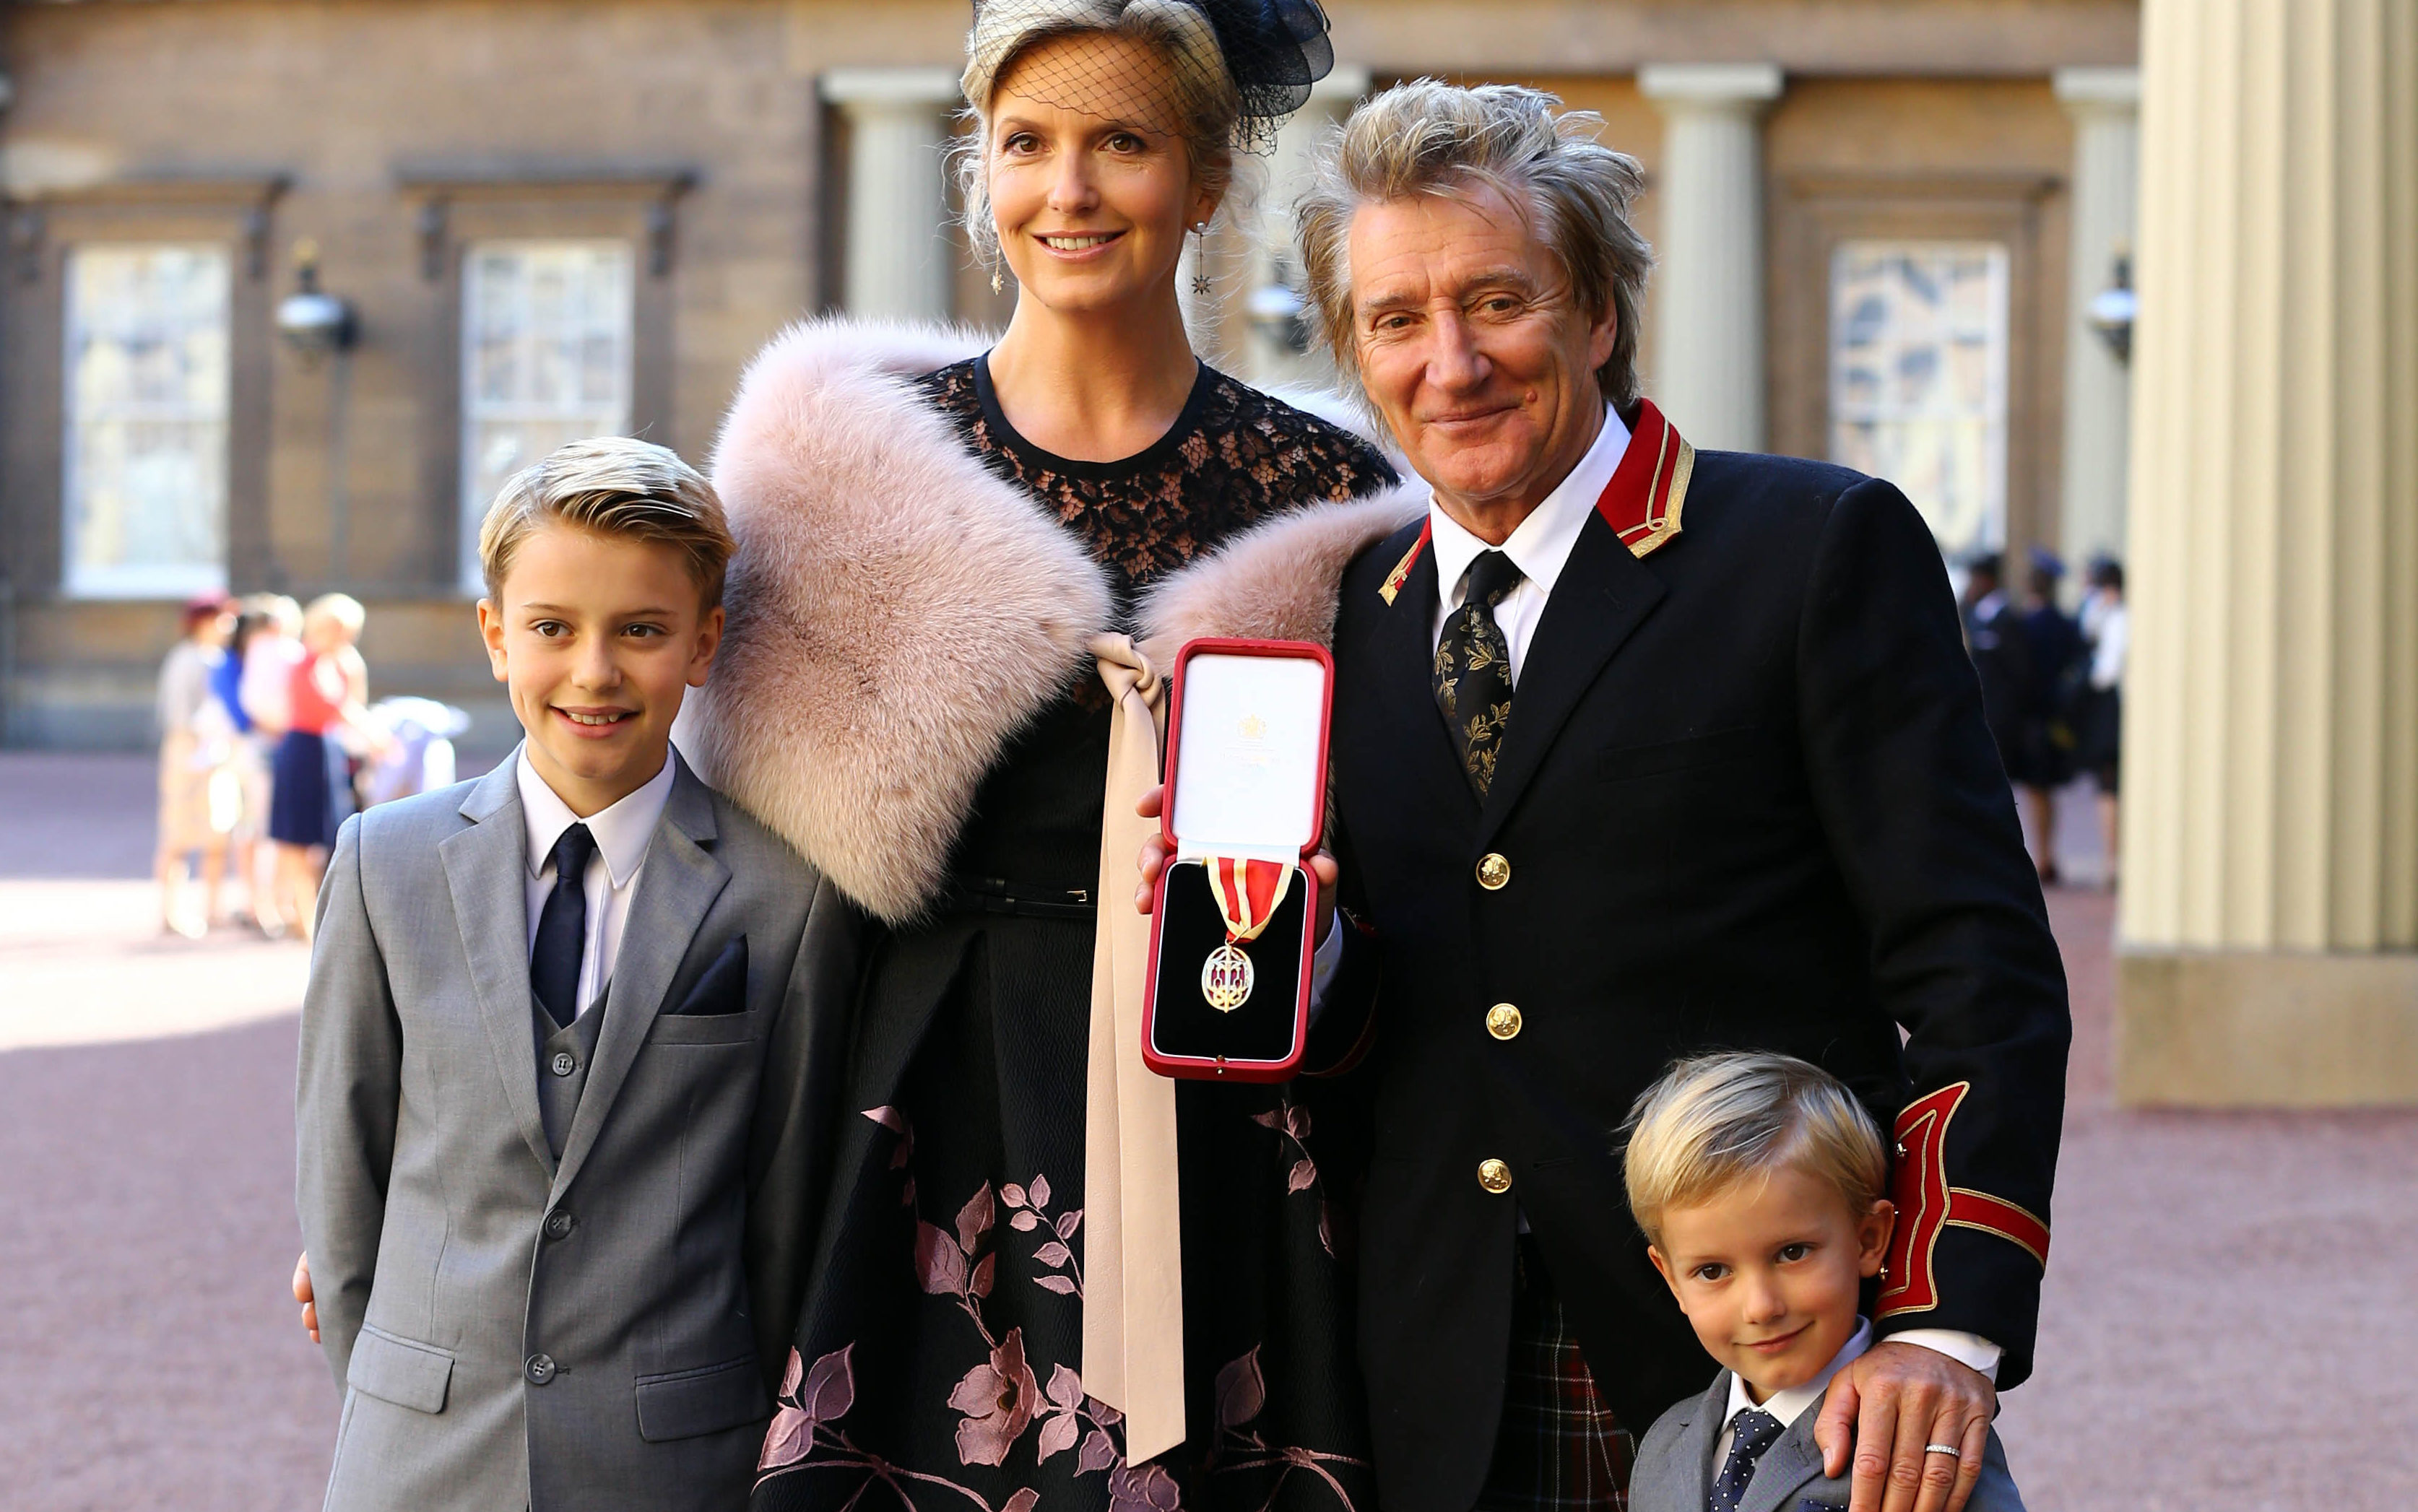 Sir Rod after getting his knighthood in 2016 with wife Penny Lancaster and sons Alistair and Aiden 
(Gareth Fulller/PA Wire)